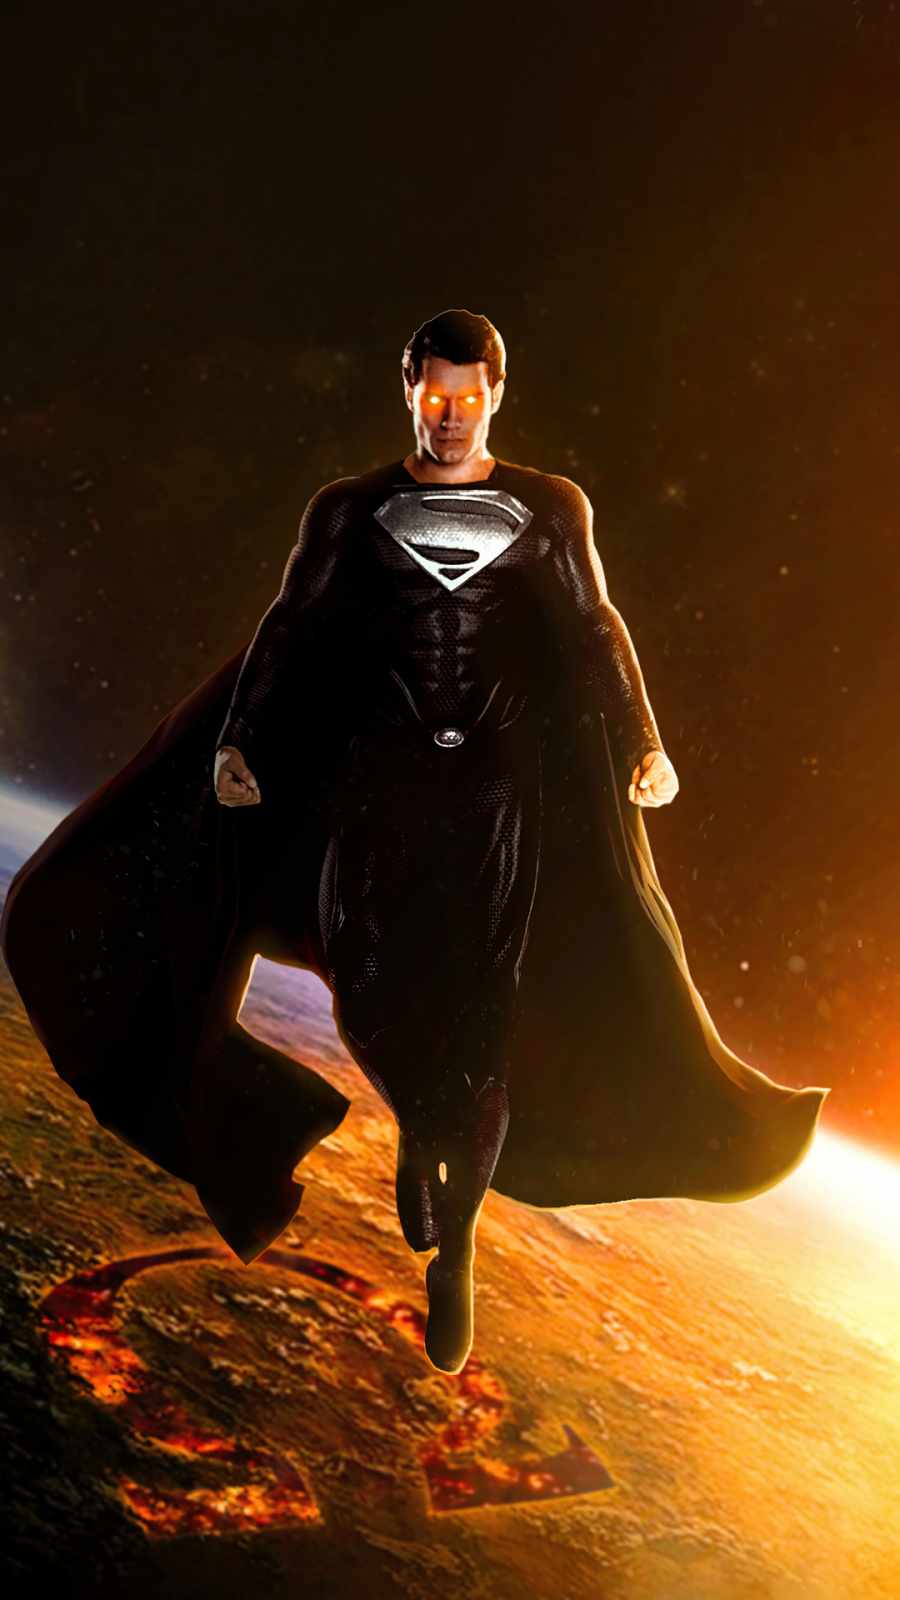 Black Suit Superman Snyder Cut - IPhone Wallpapers : iPhone Wallpapers